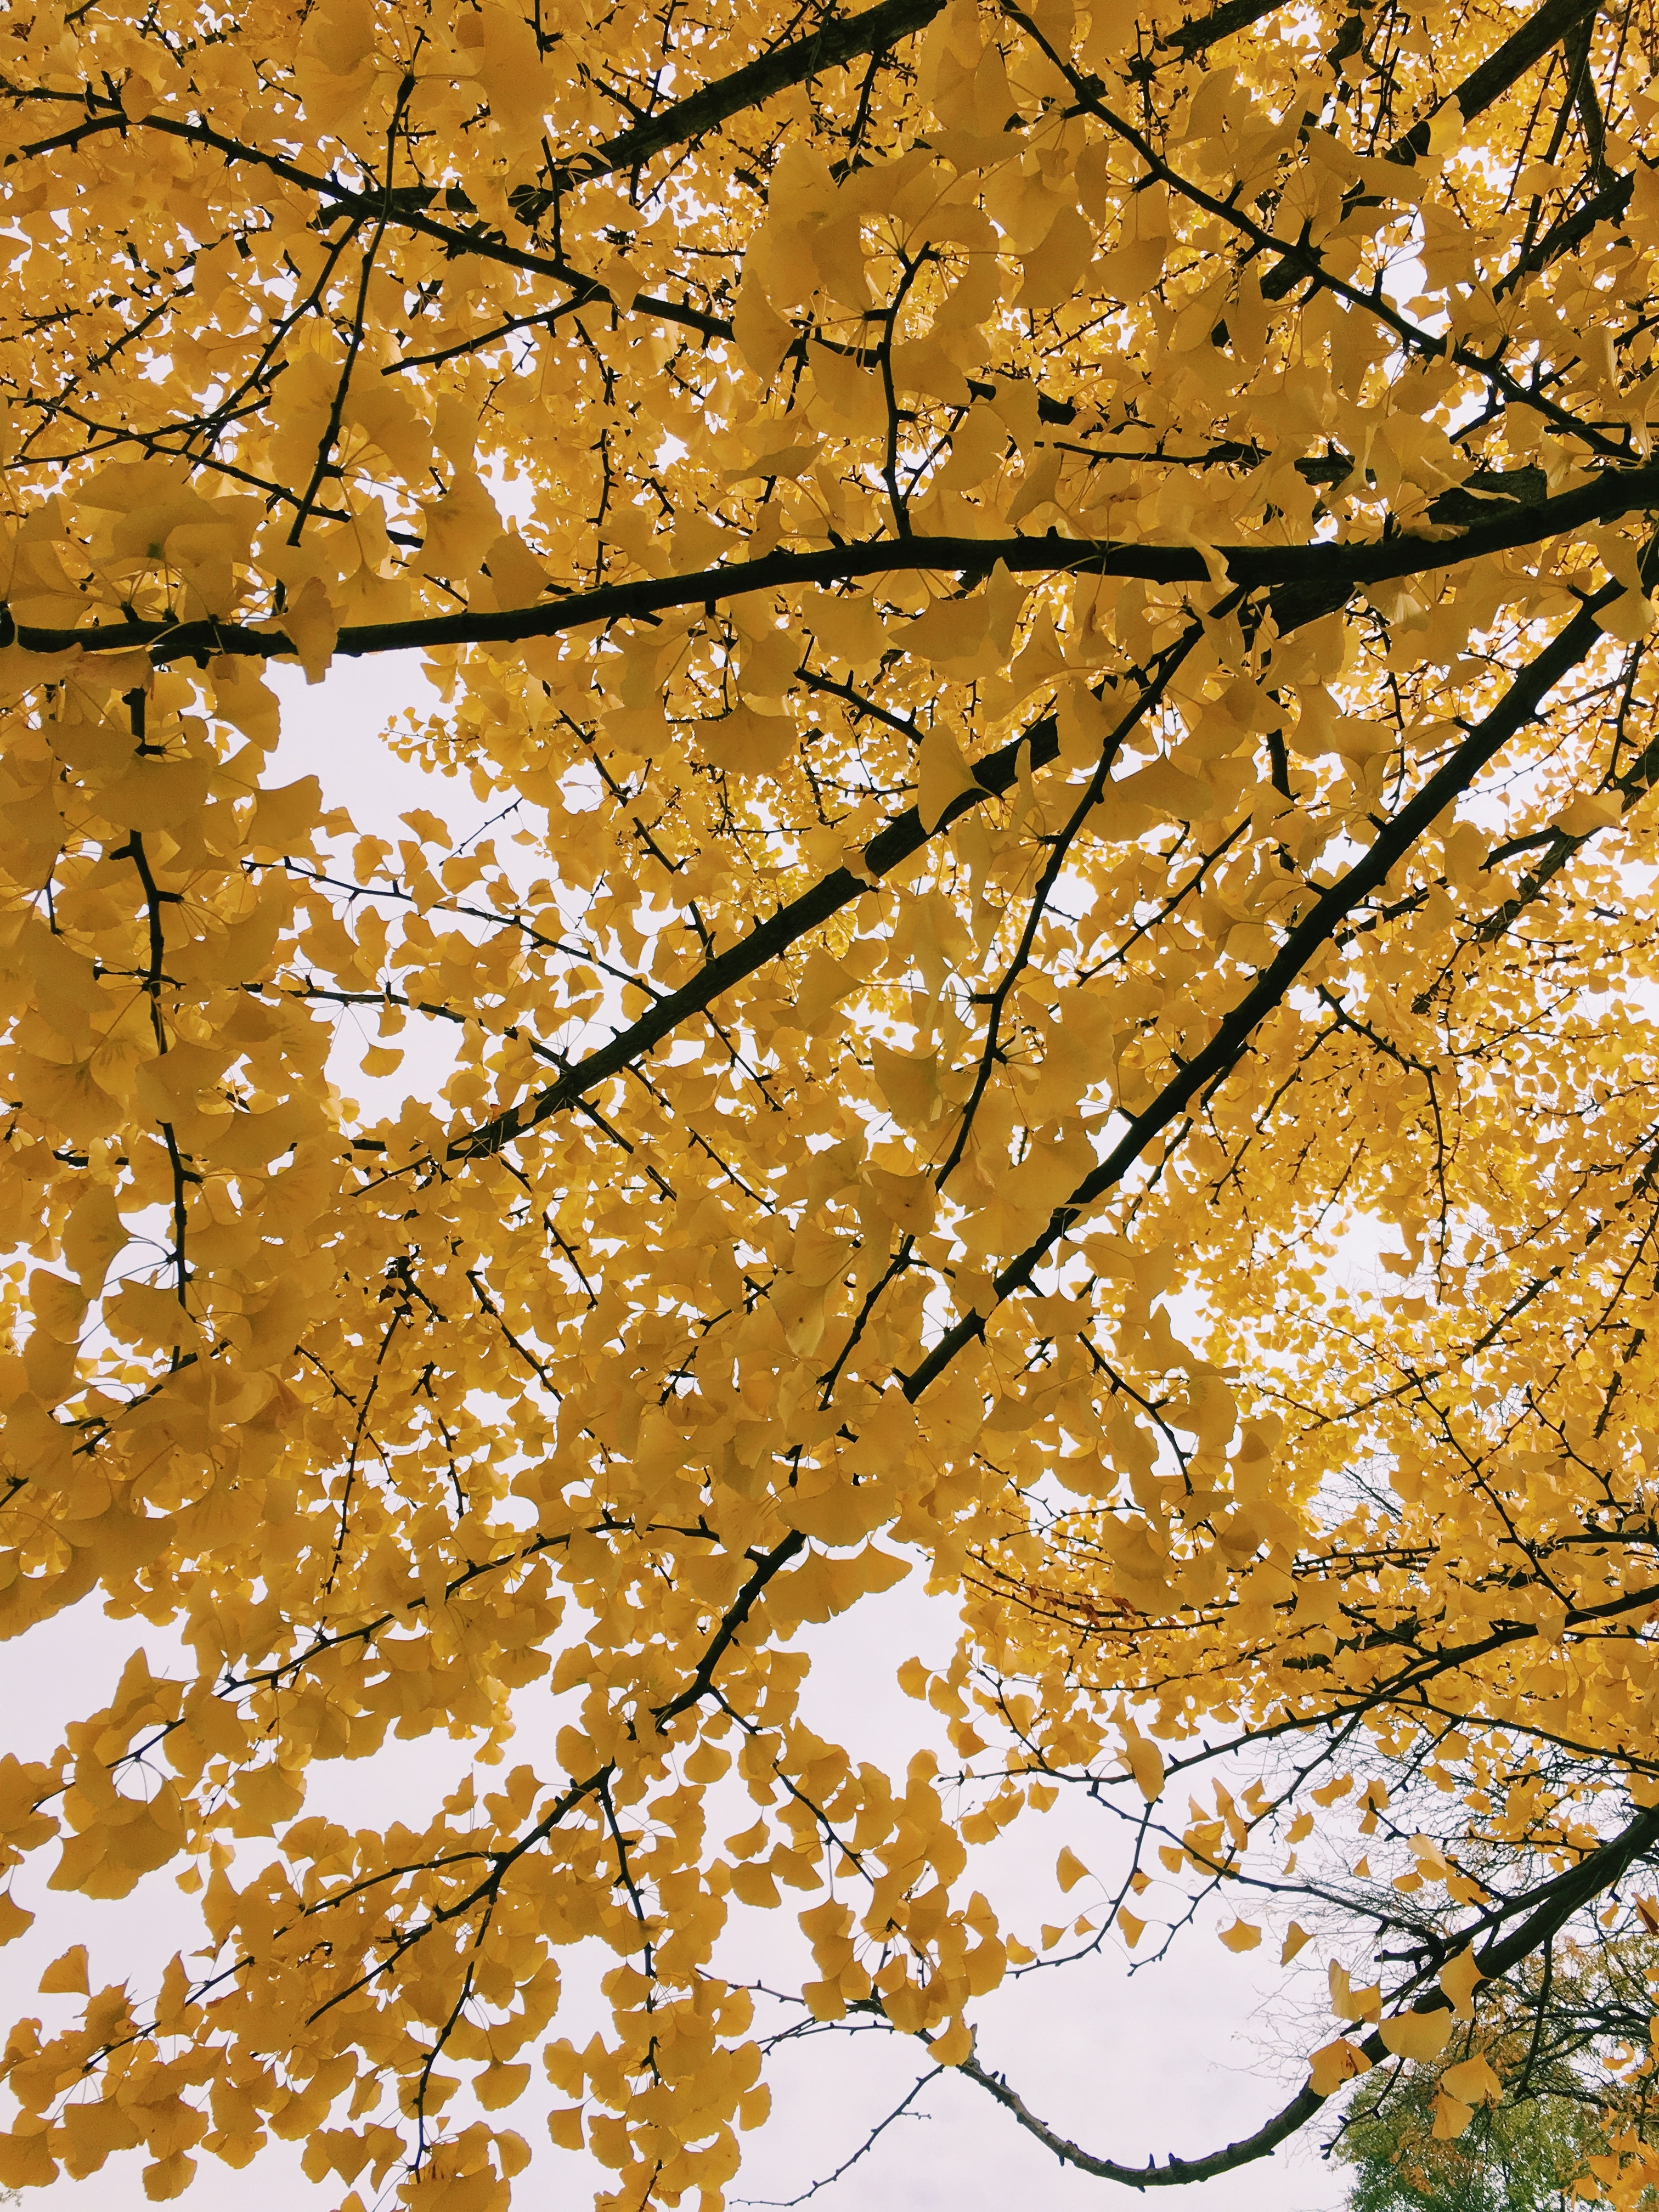 The branches of a yellow tree against a cloudy sky